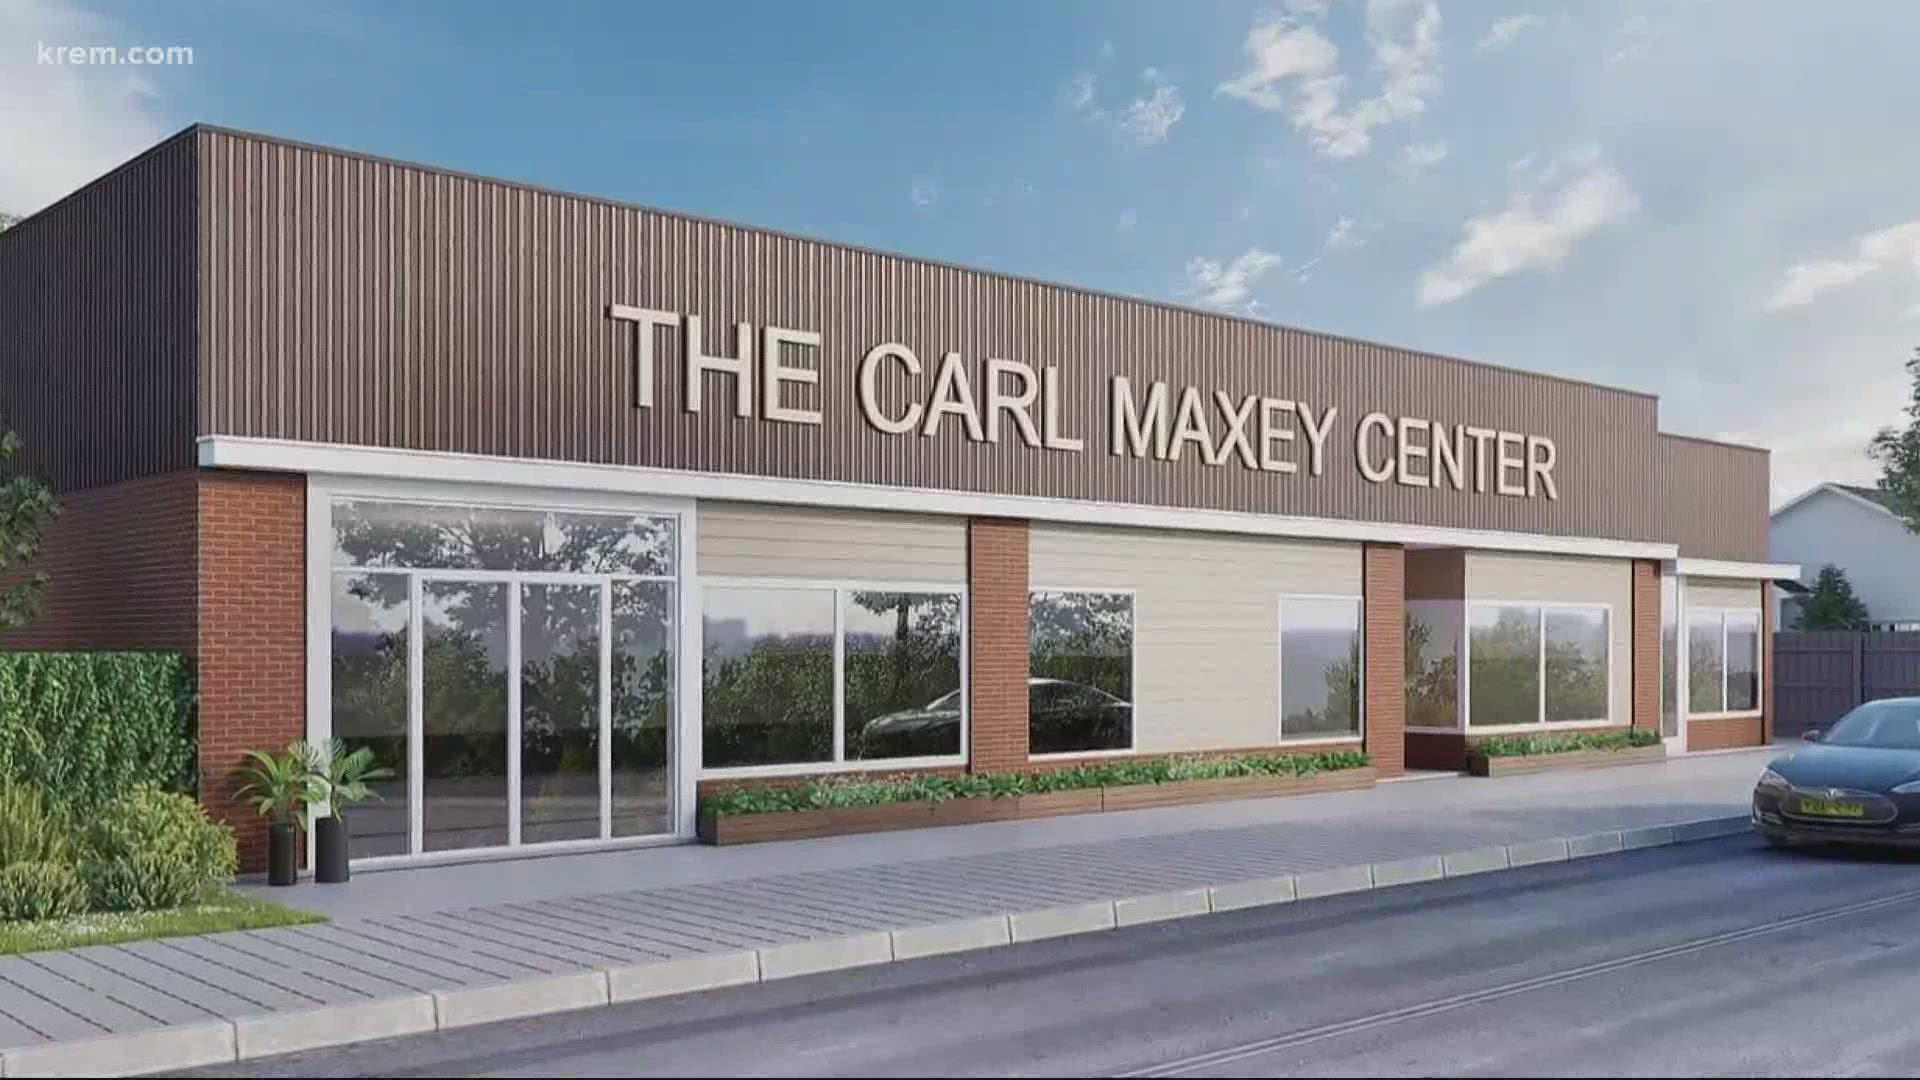 Carl Maxey was a Spokane's first Black lawyer and a boxer with a national title. It was his legacy that inspired the vision for the center.